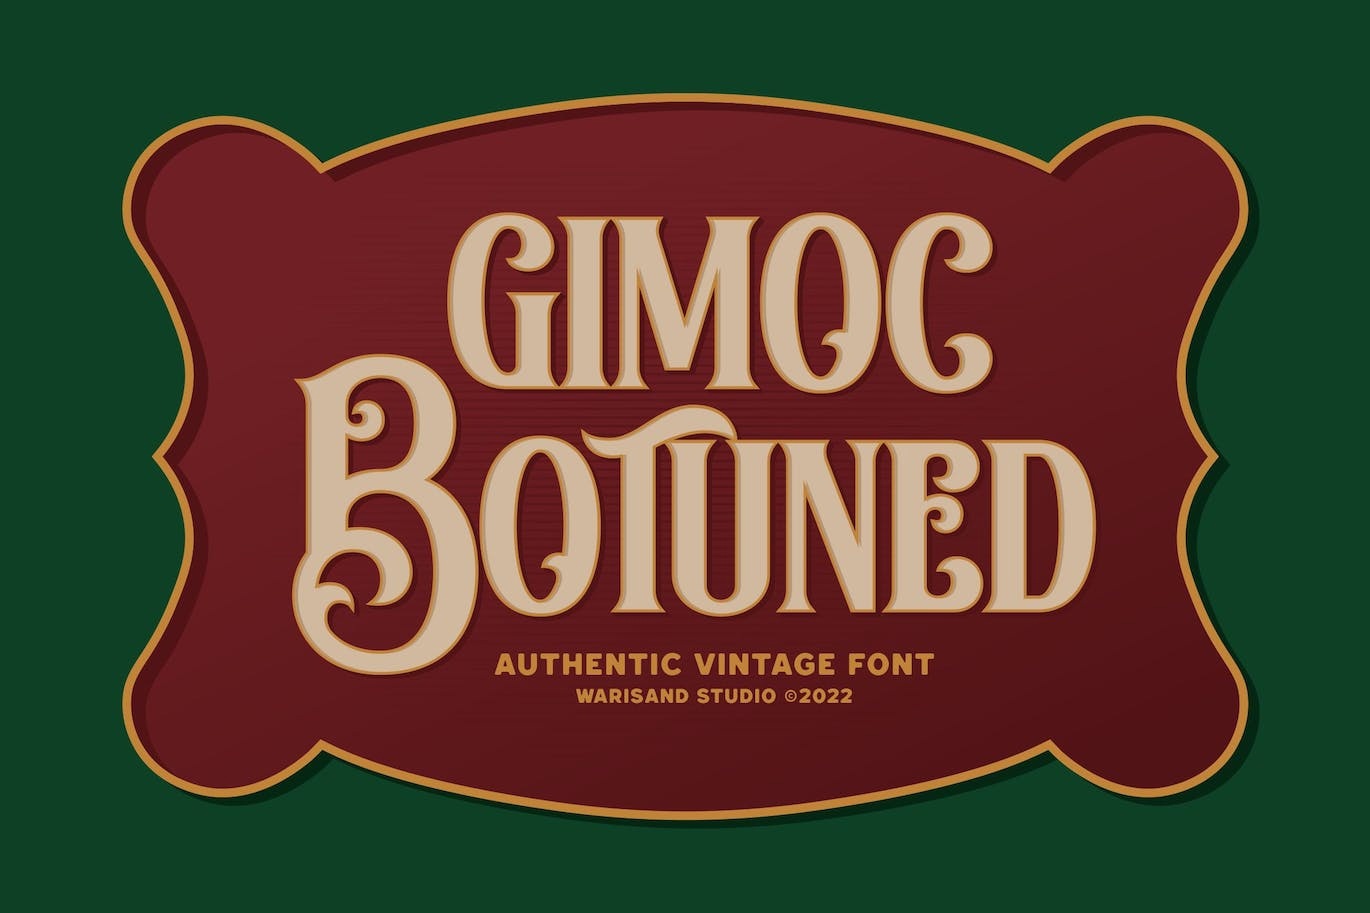 Gimoc Botuned Font preview